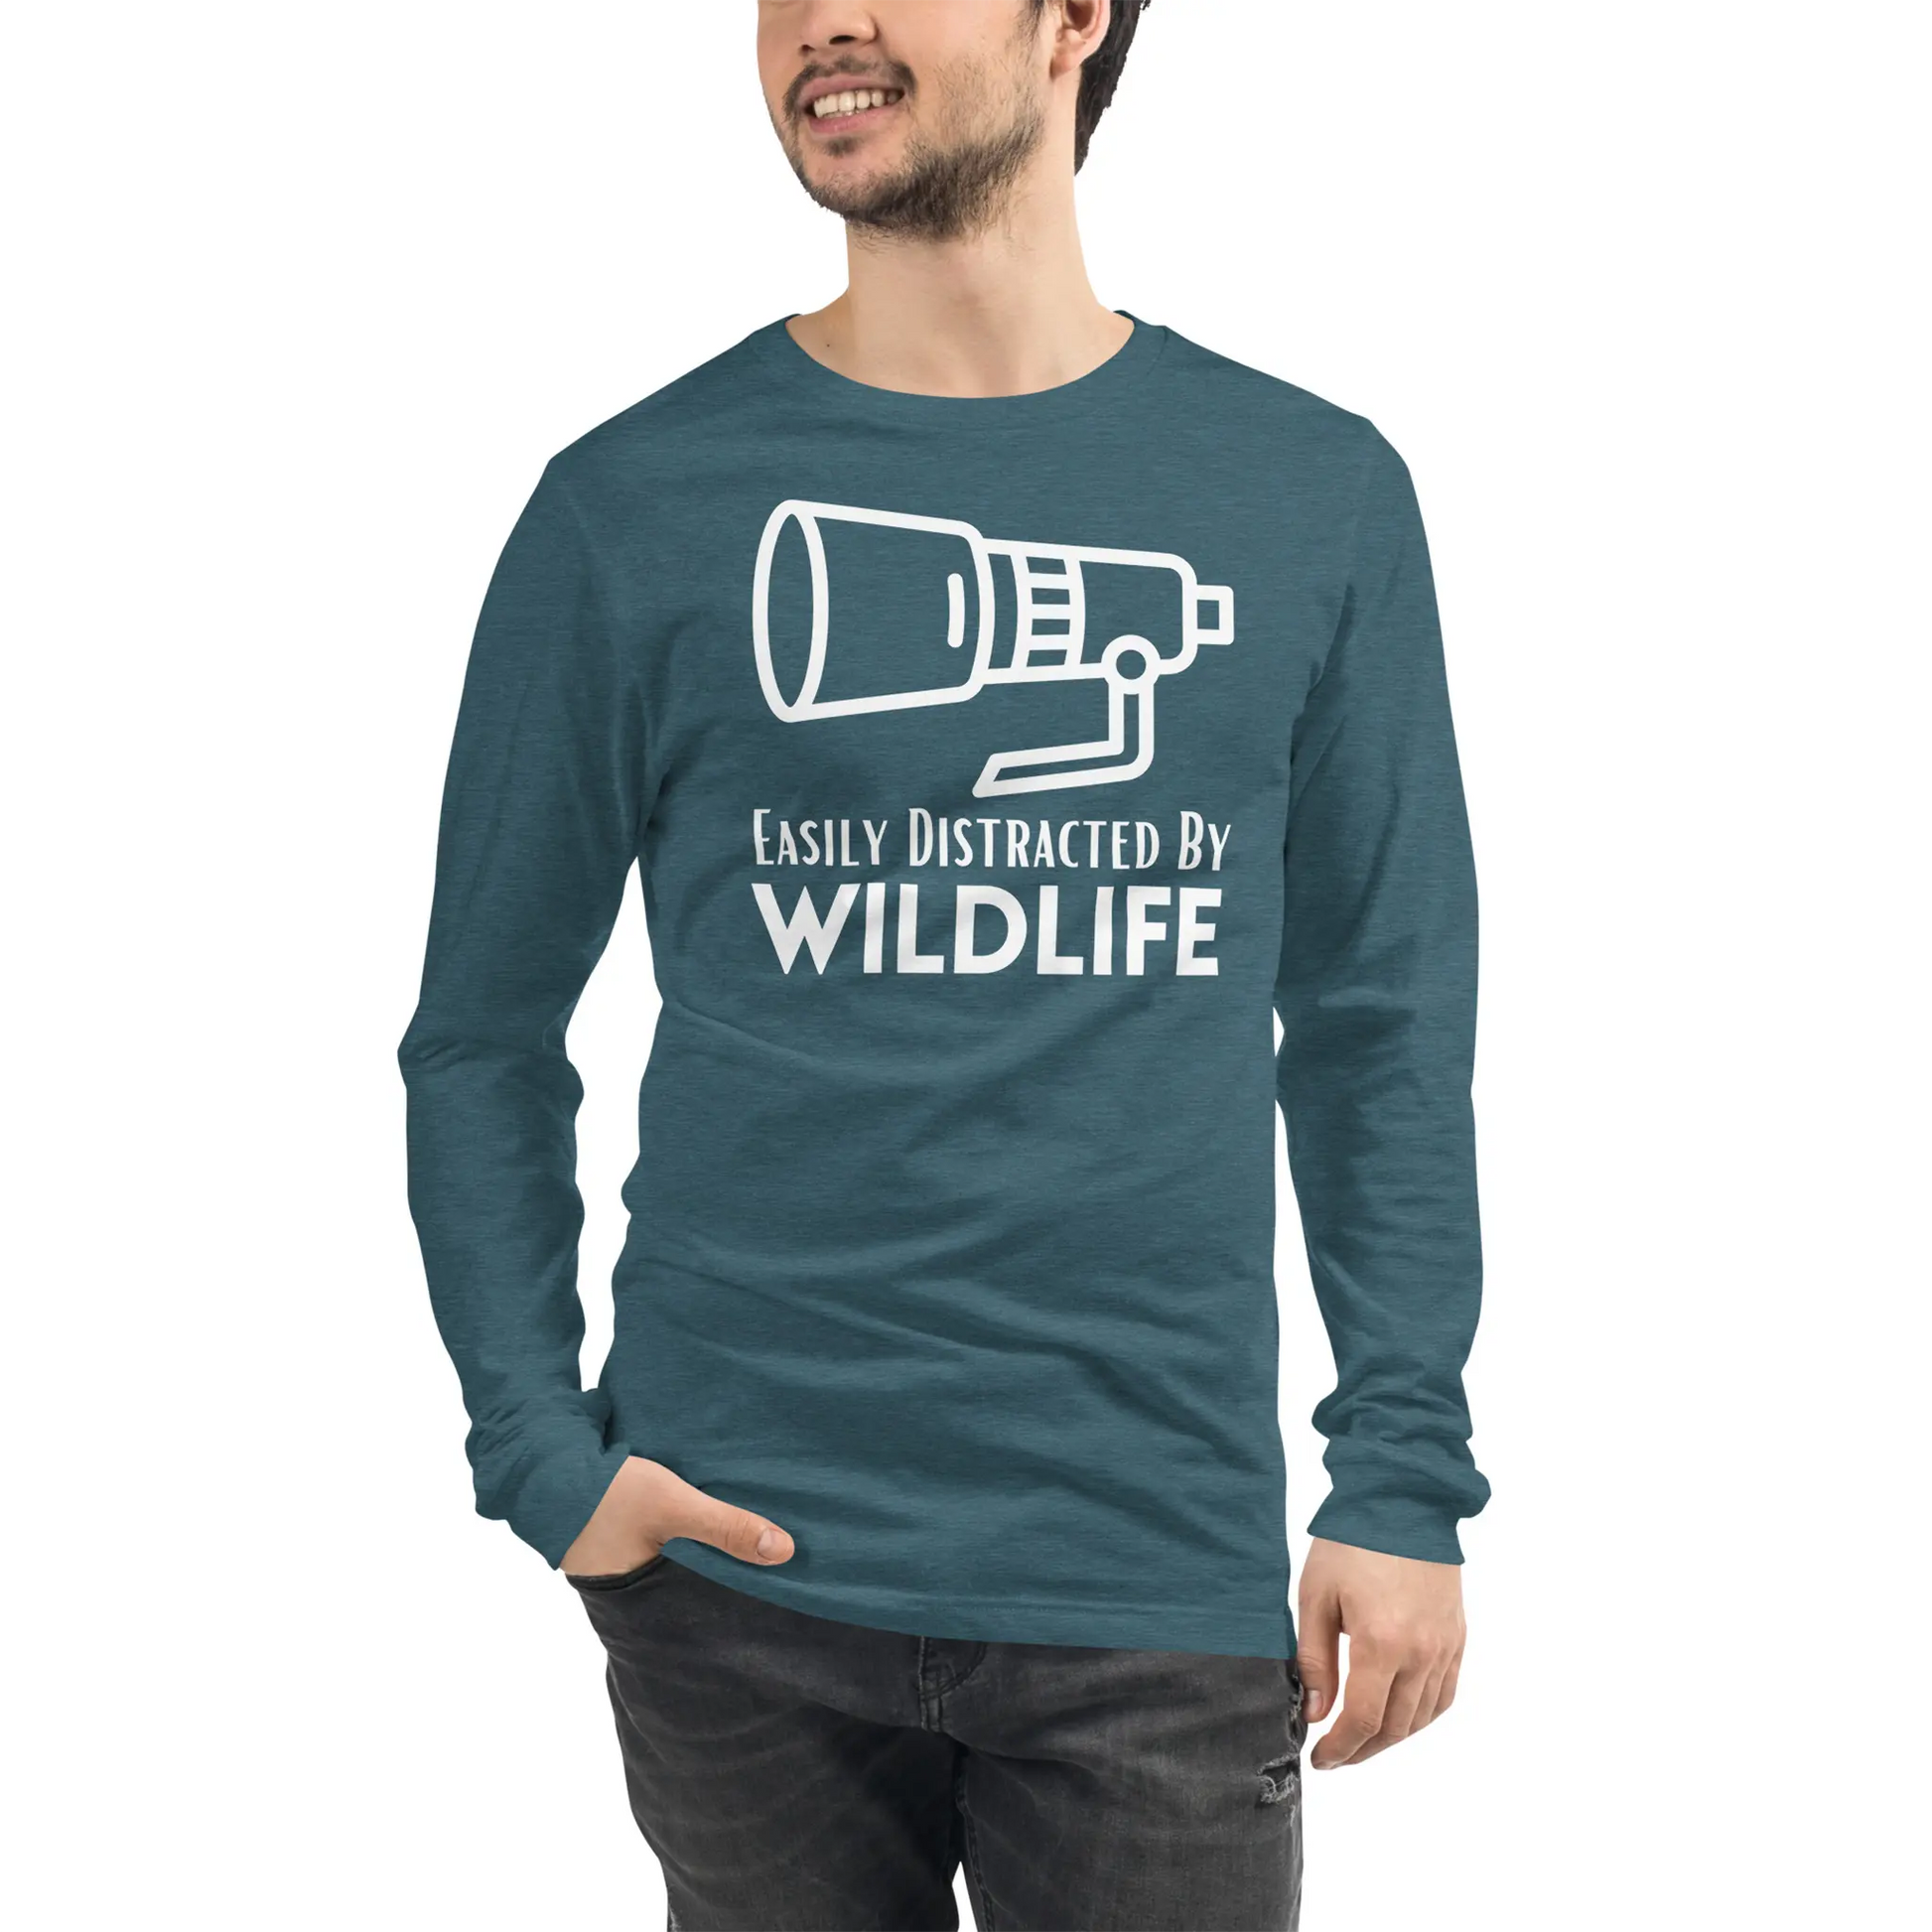 Wildlife photography long sleeve shirts for men.